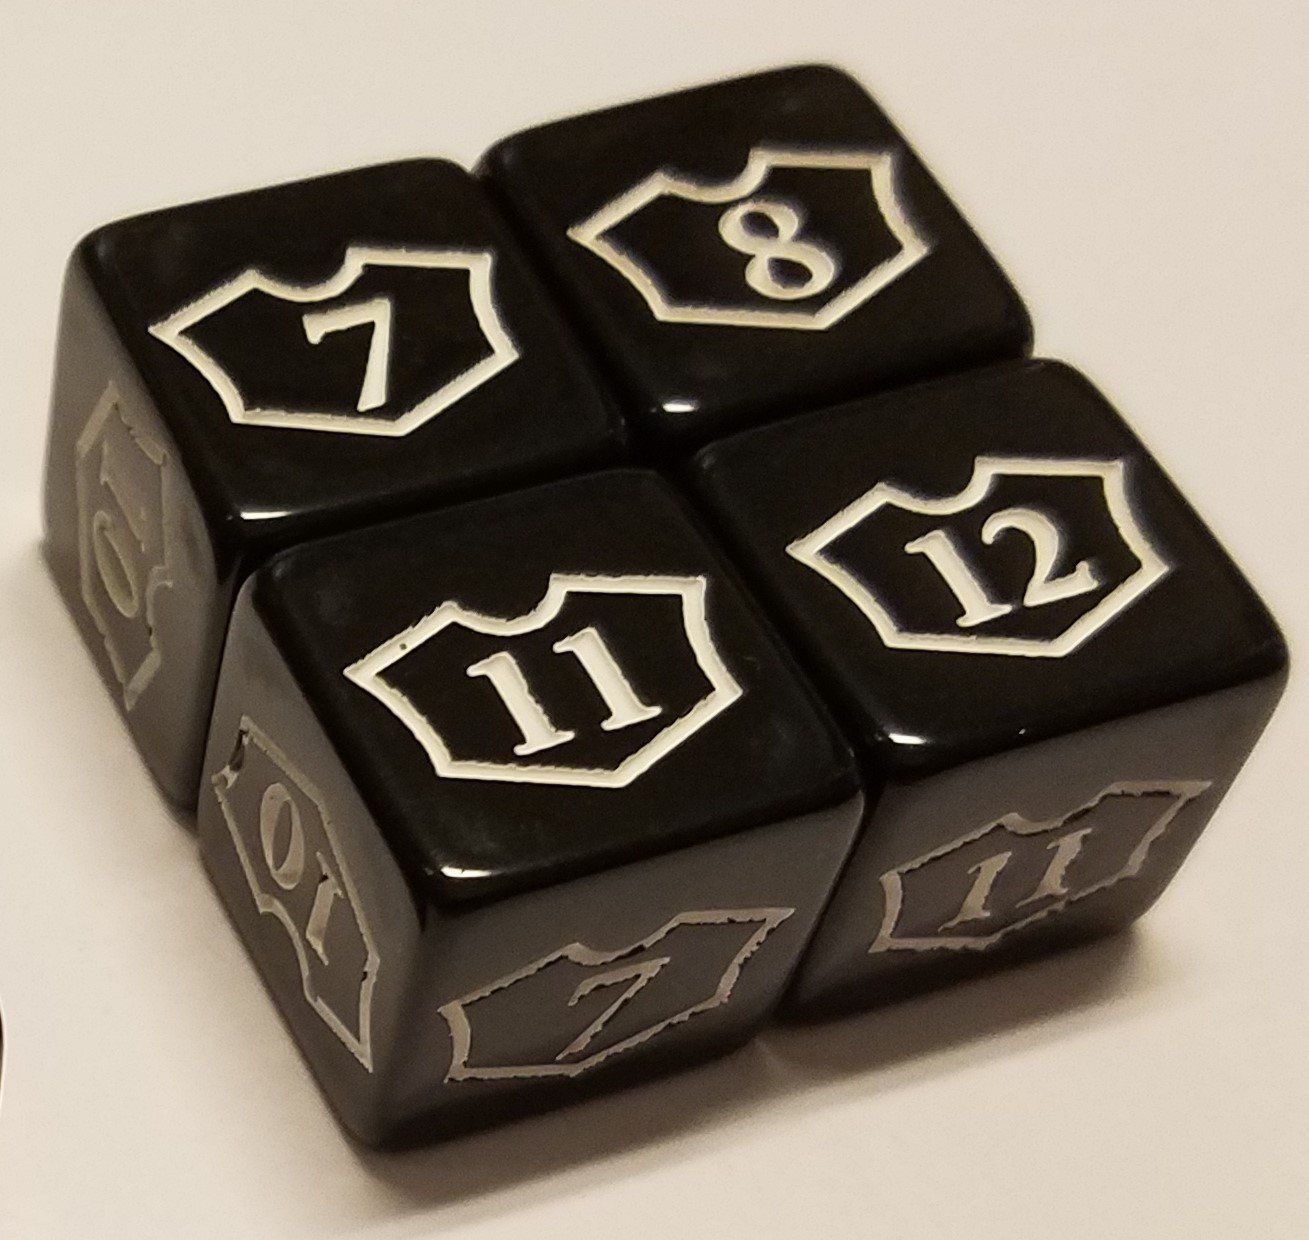 18x Counter, Tarmogoyf & Loyalty Dice for Magic: The Gathering and Other Games/CCG MTG